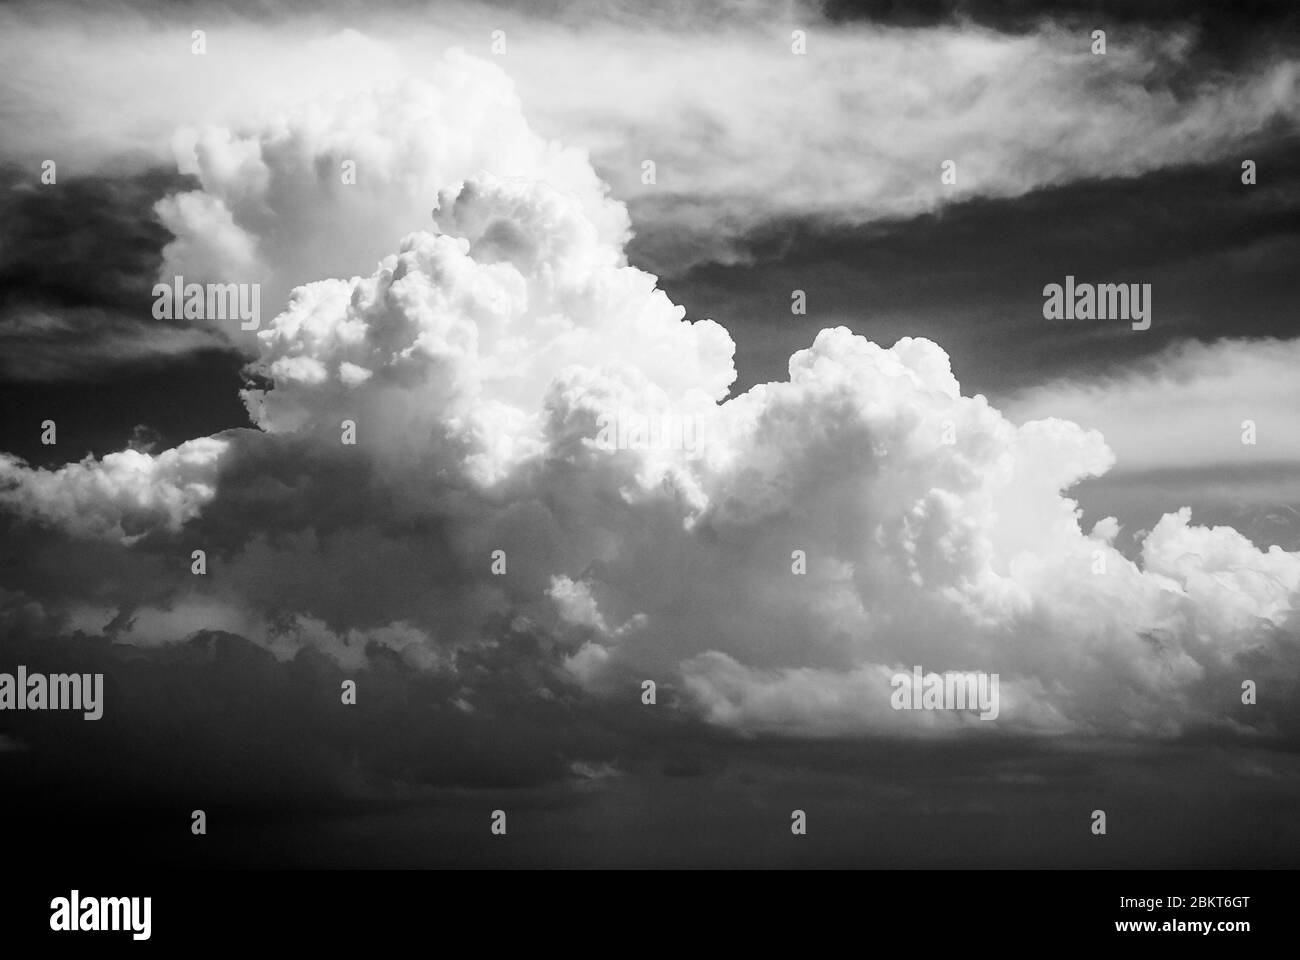 Dramatic Clouds And Sky In Black And White Stock Photo Alamy